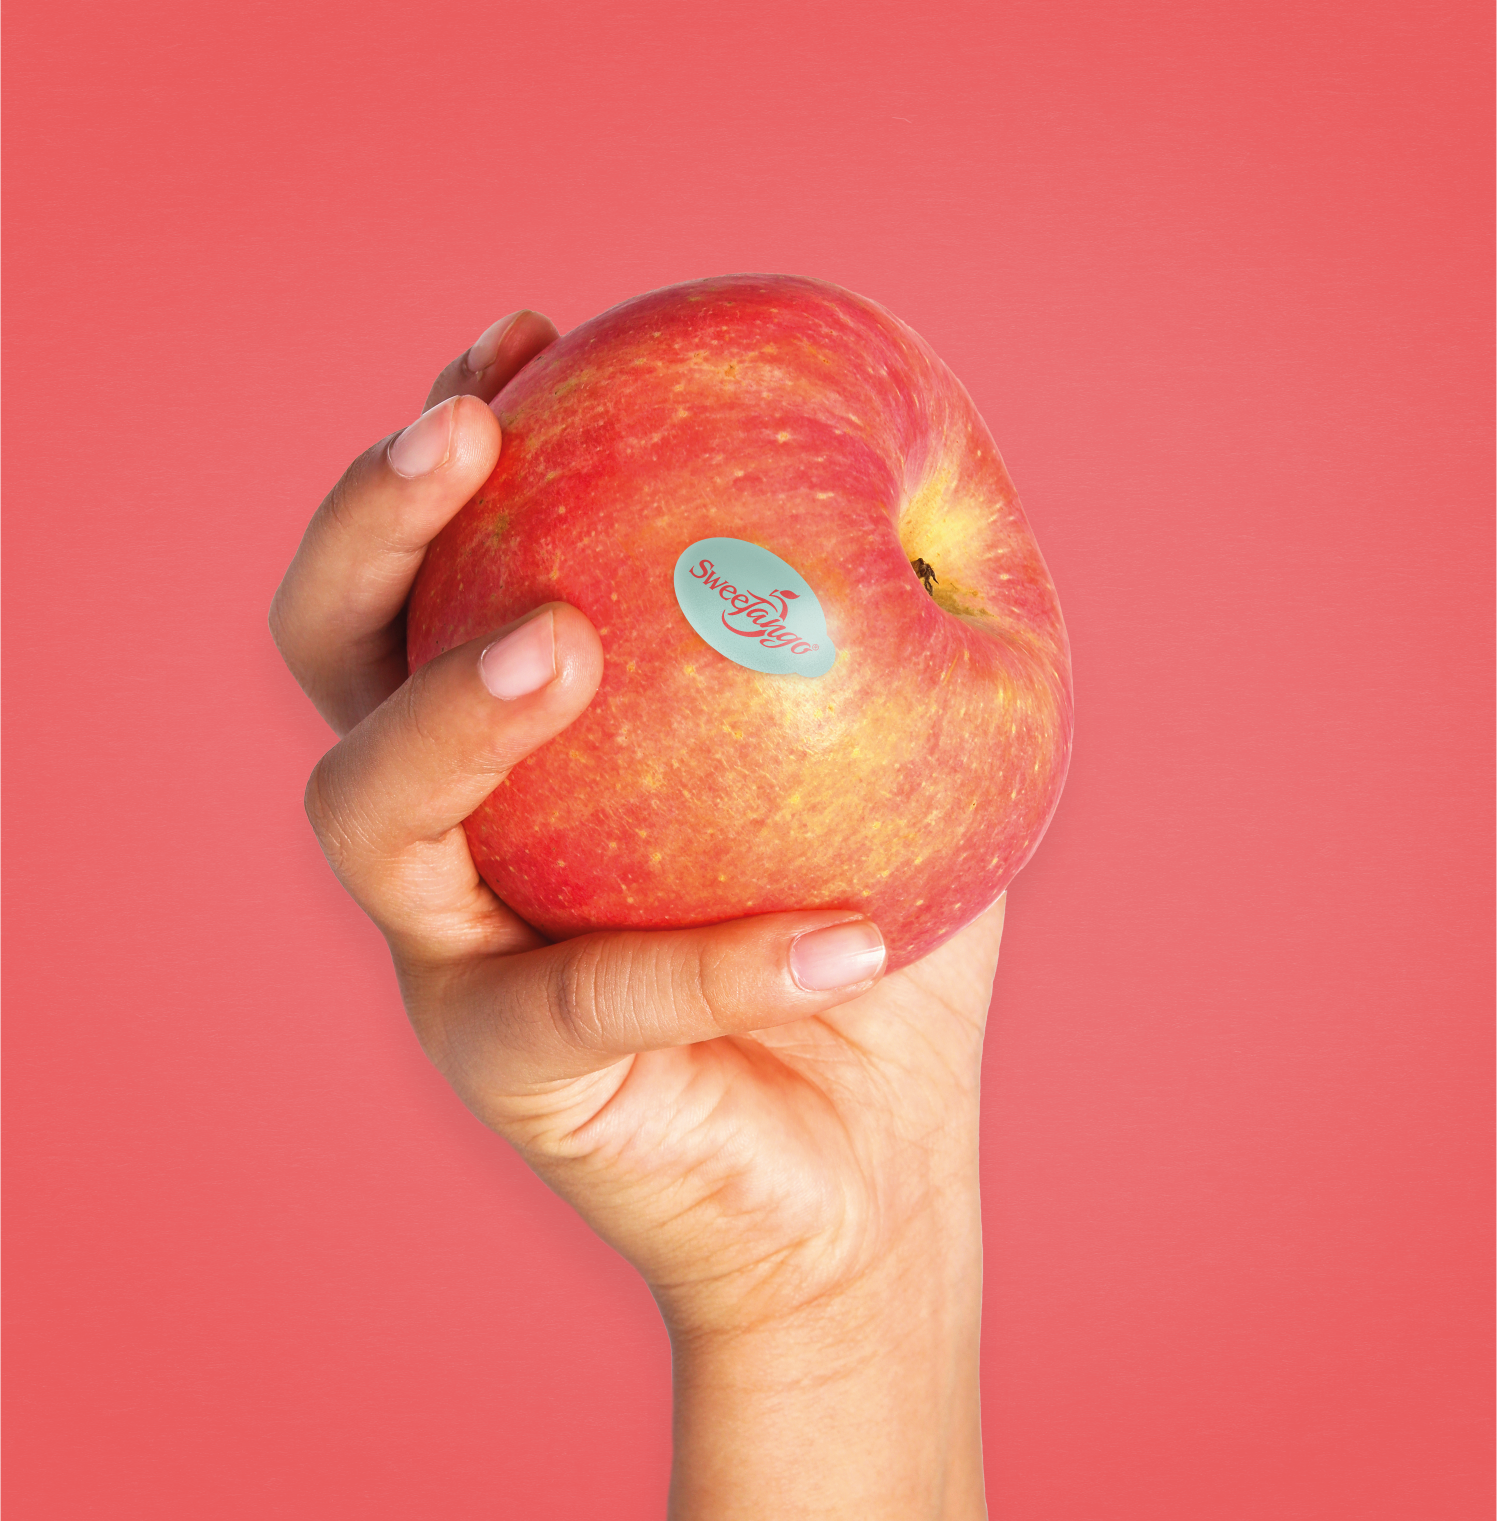 Hand holding Montague Sweetango apple with sticker